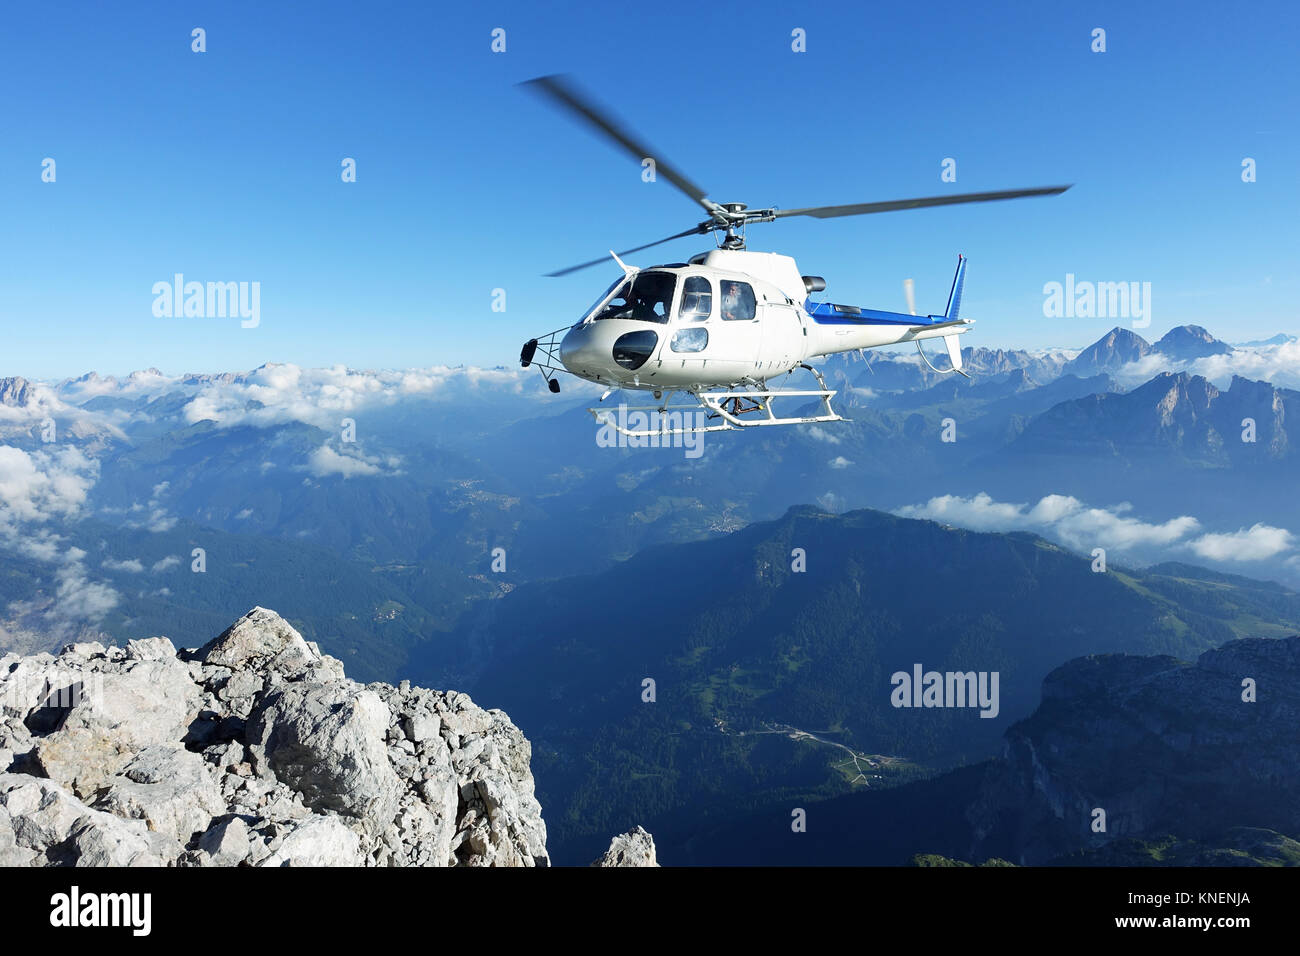 Helicopter approaching BASE jumper exit at the cliff edge Stock Photo